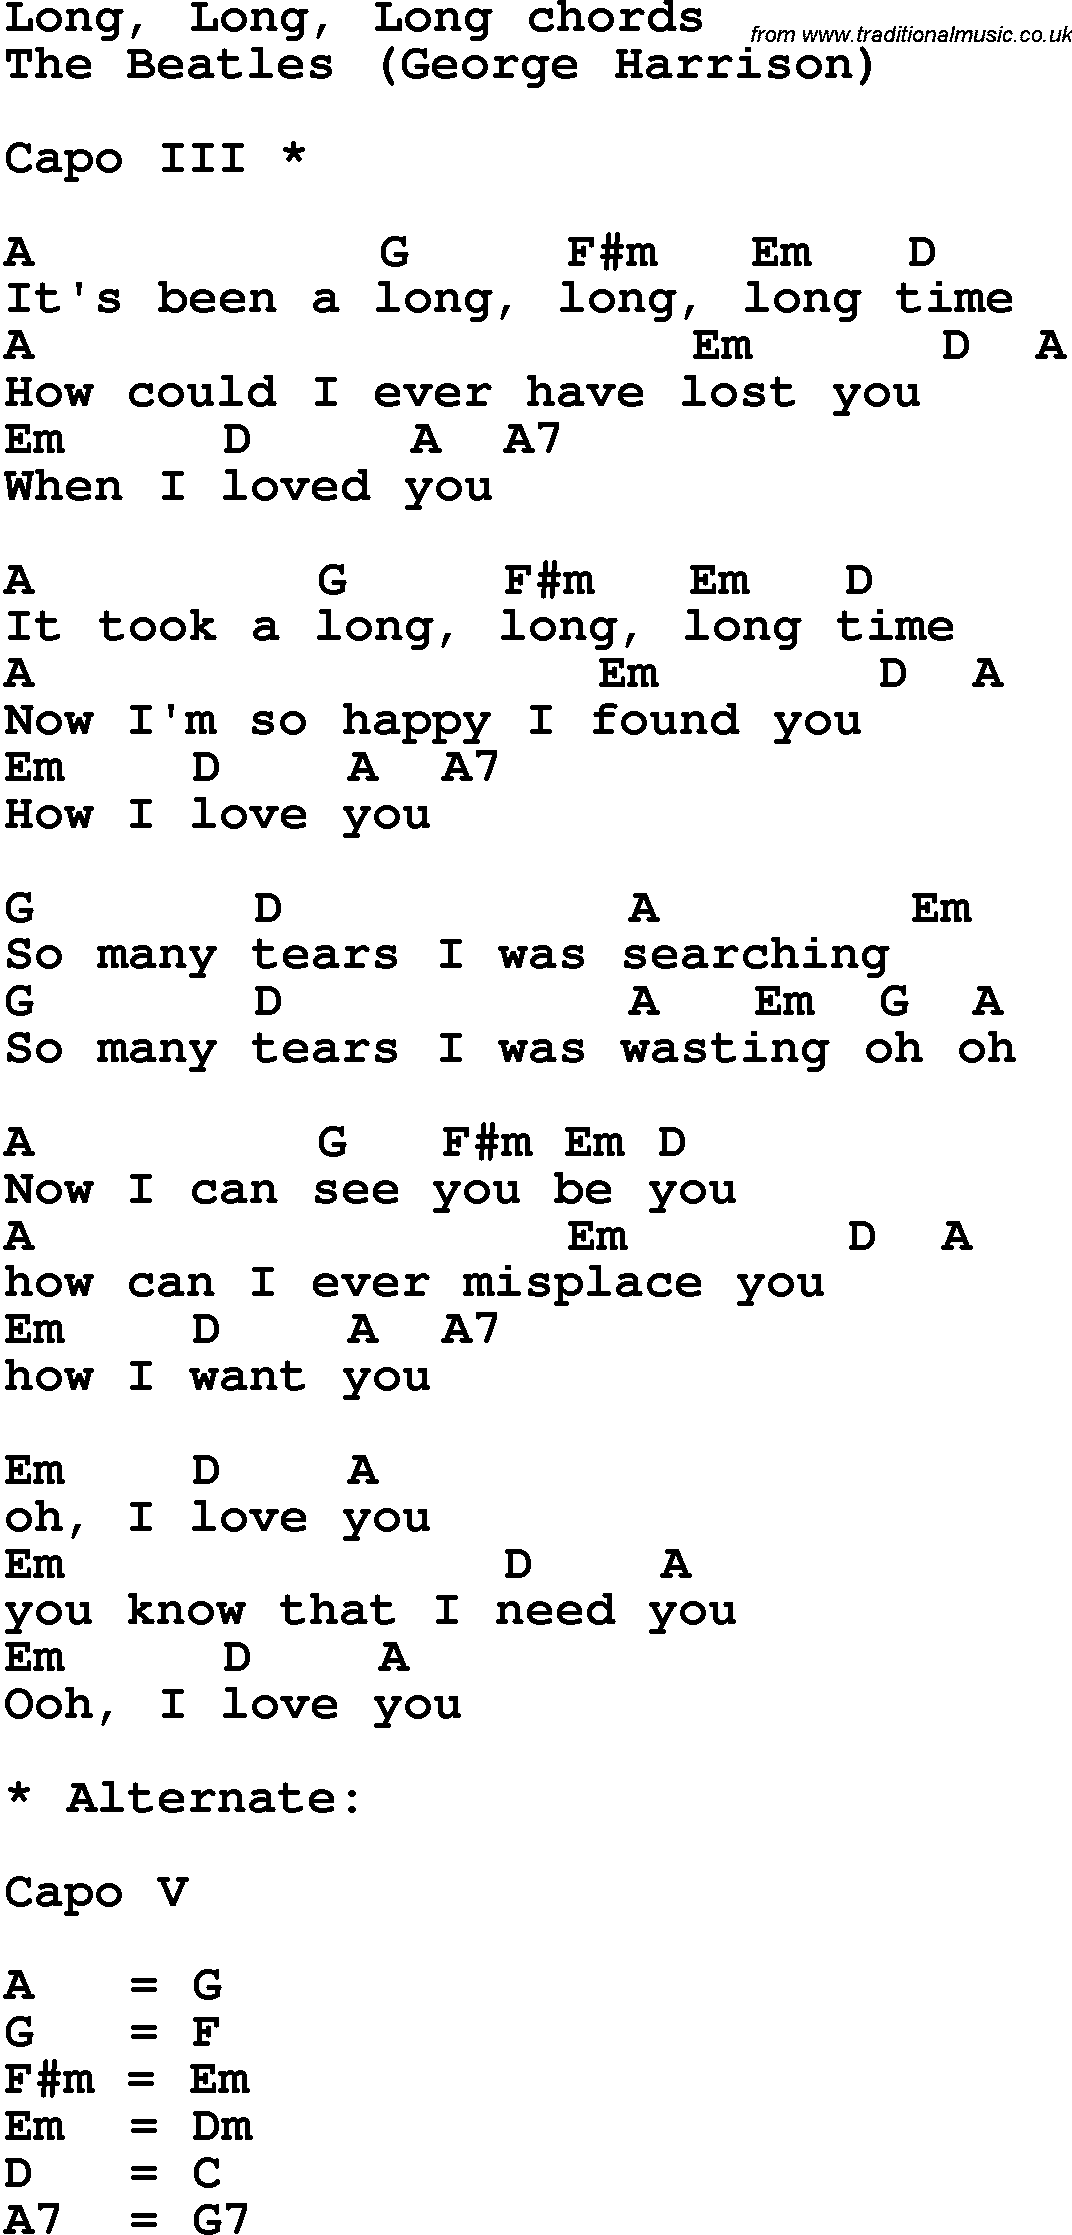 Song Lyrics with guitar chords for Long Long Long - The Beatles